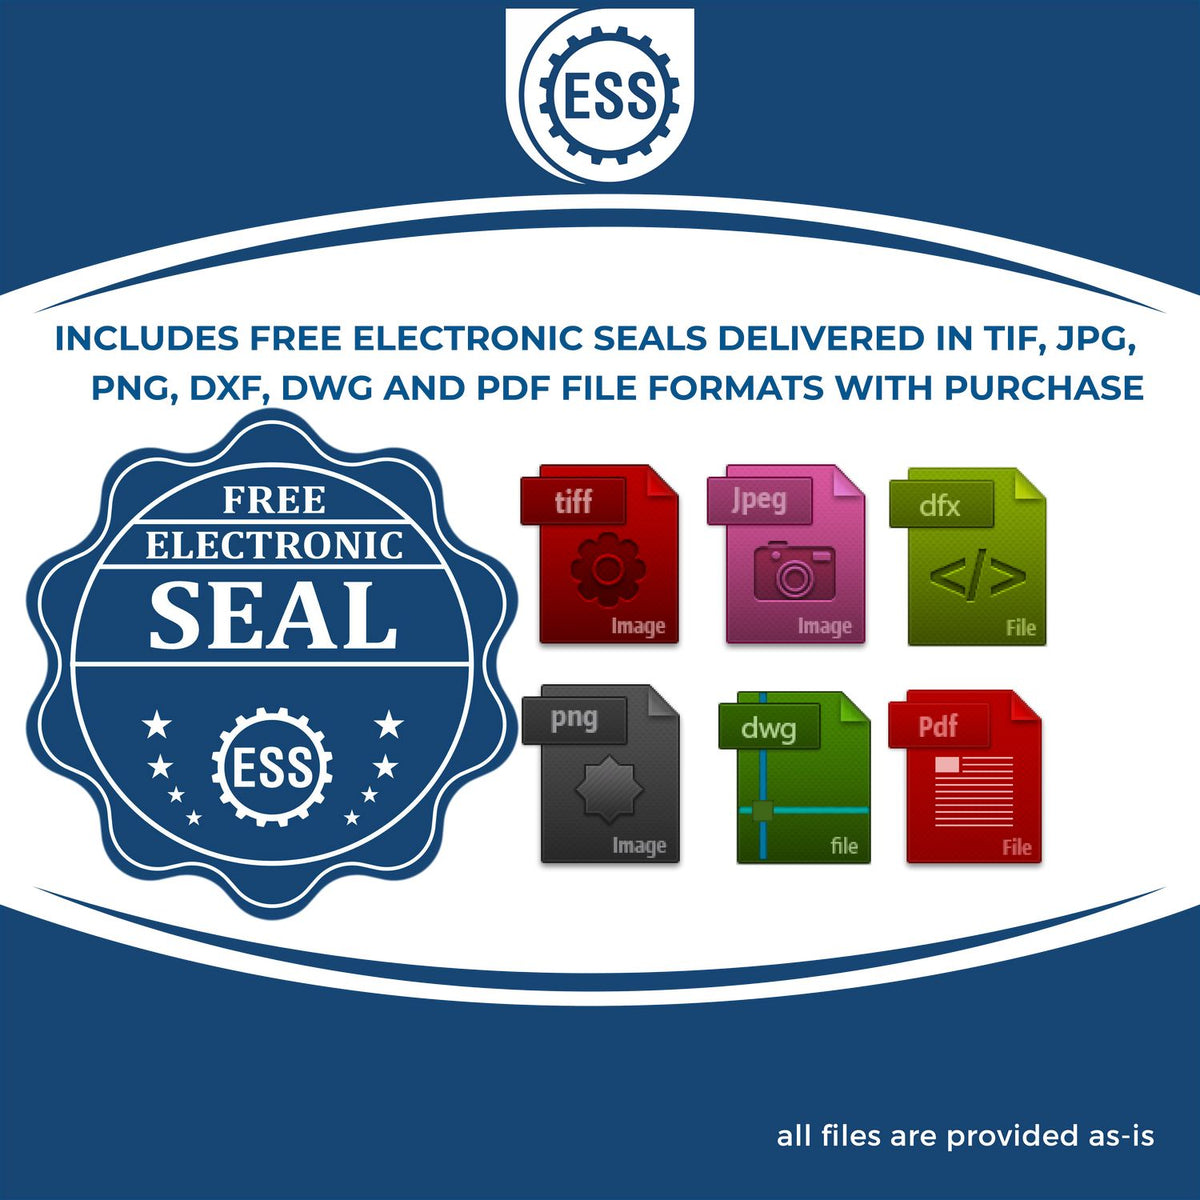 An infographic for the free electronic seal for the Slim Pre-Inked Montana Land Surveyor Seal Stamp illustrating the different file type icons such as DXF, DWG, TIF, JPG and PNG.